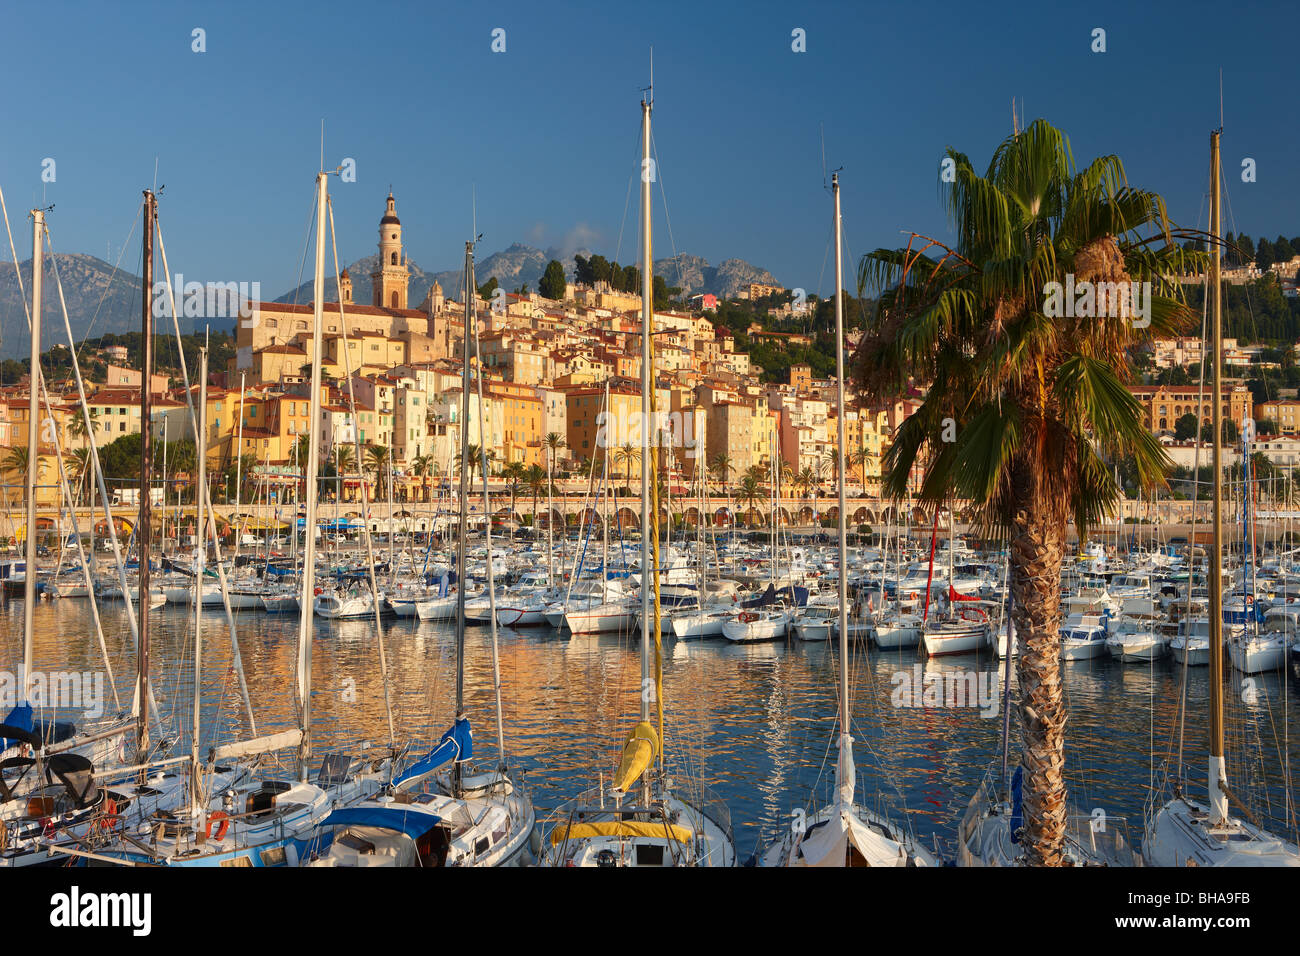 the harbour and Old Town of Menton, Cote d'Azur, Provence, France Stock Photo